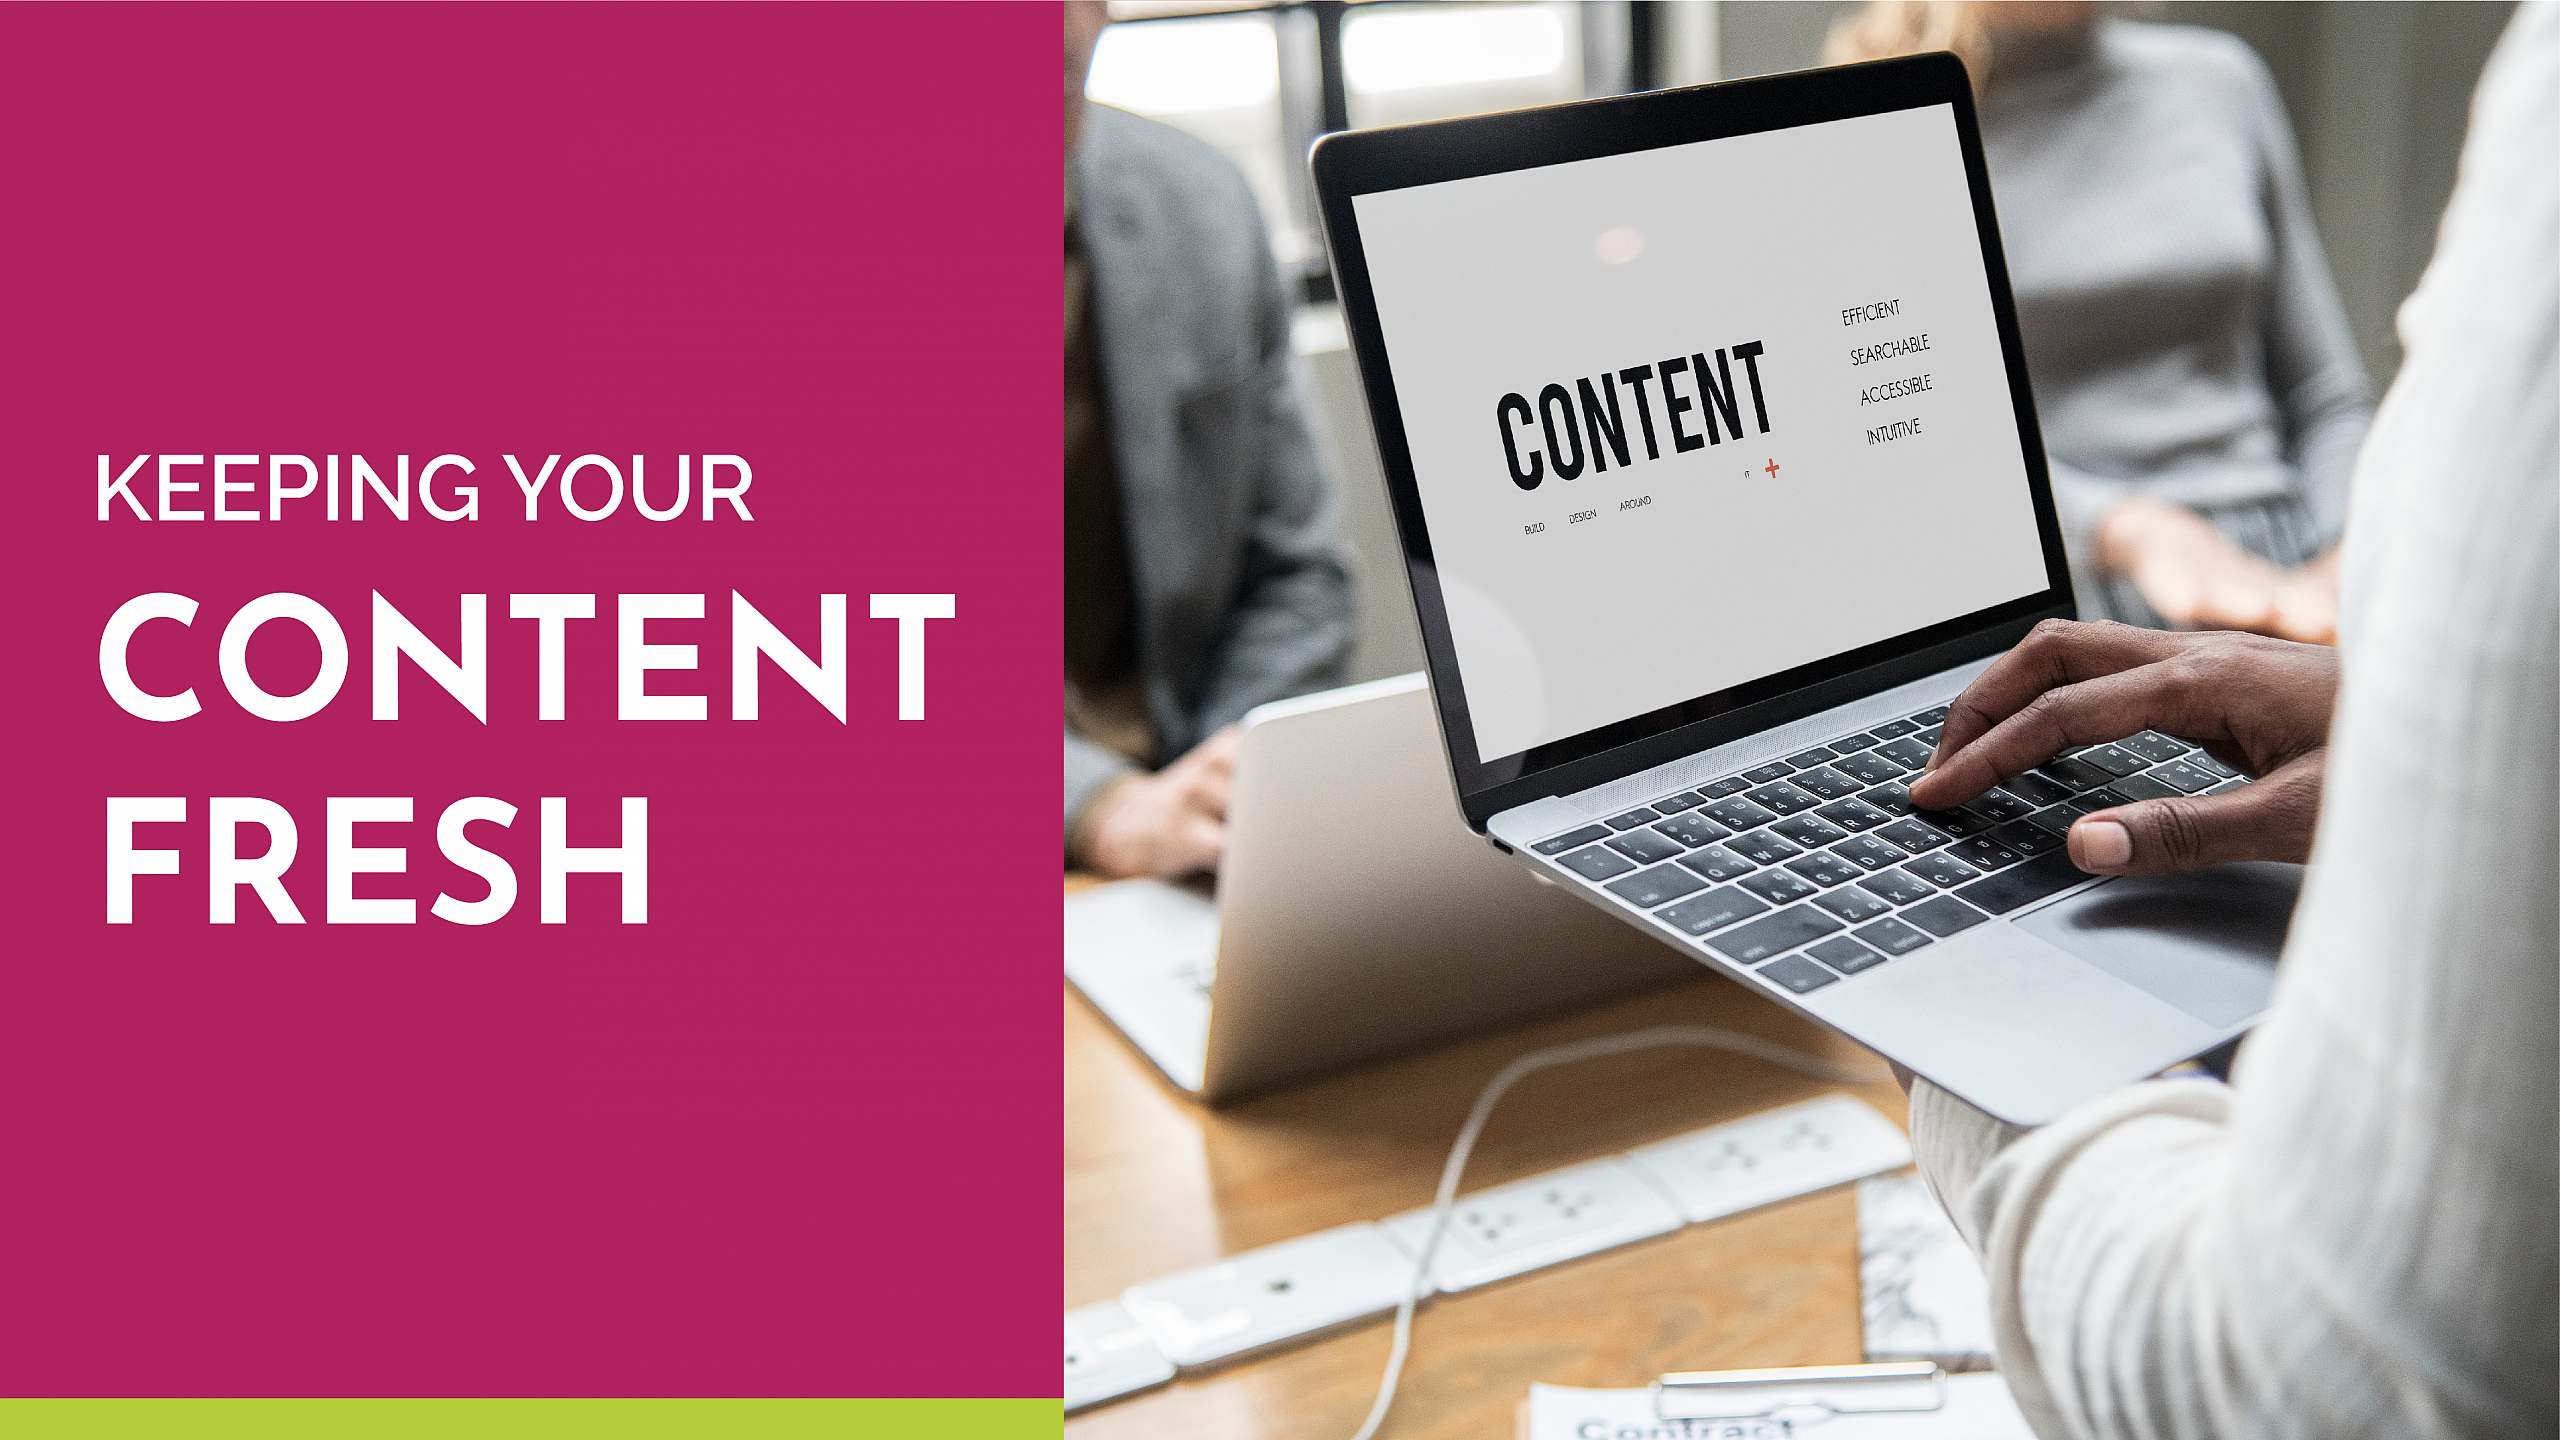 Keeping your Content Fresh